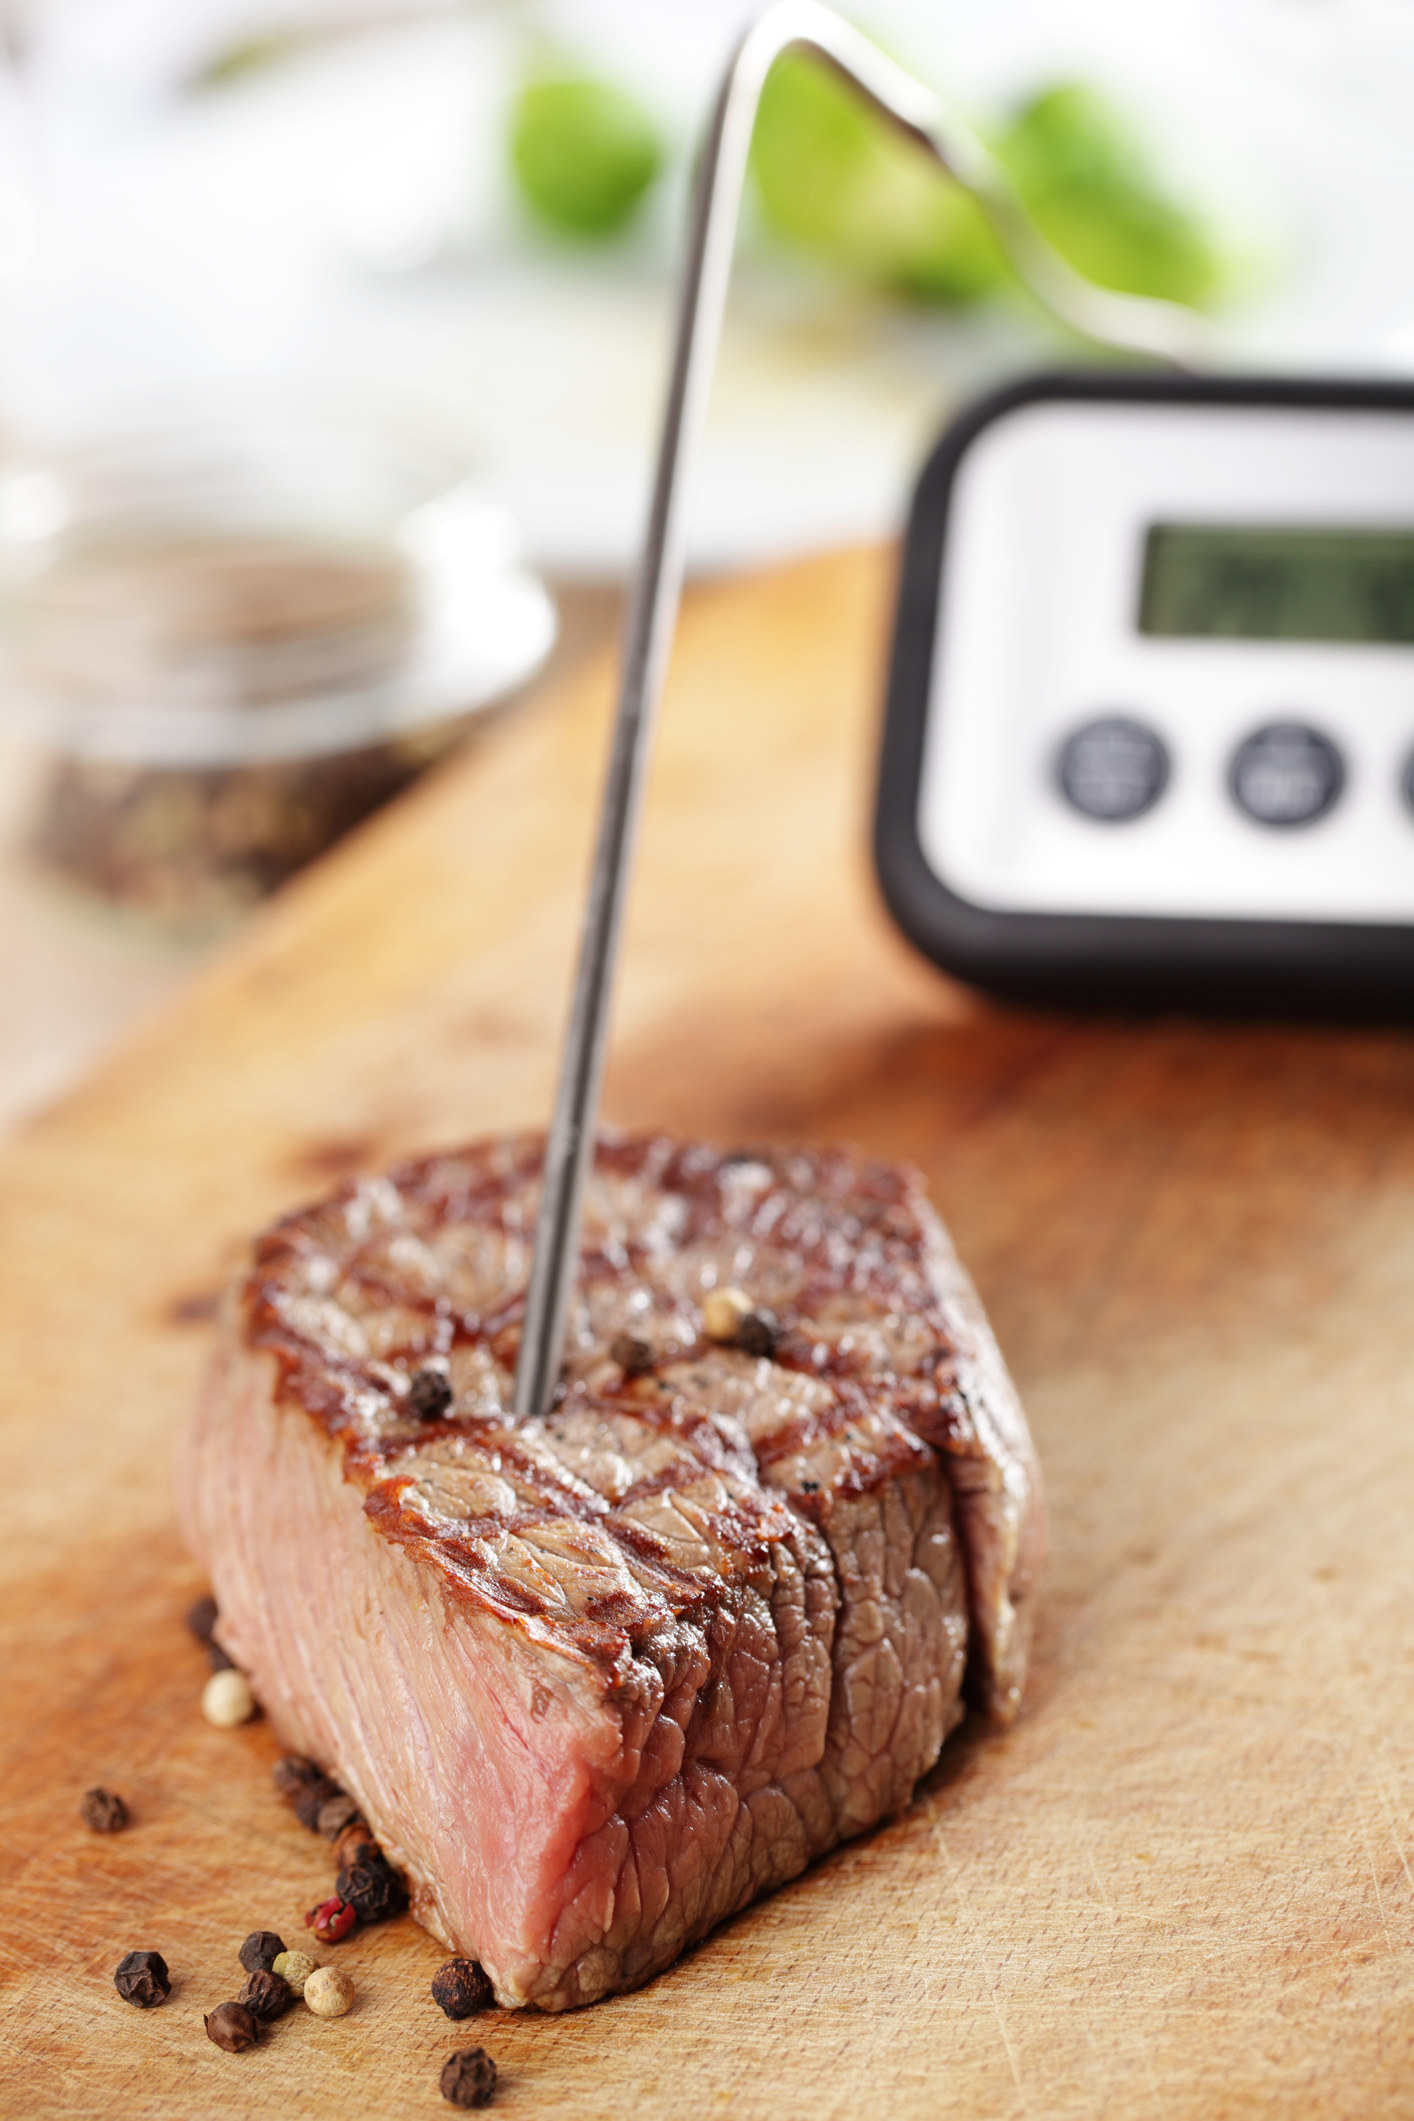 Taking the temperature of meat with a digital thermometer.